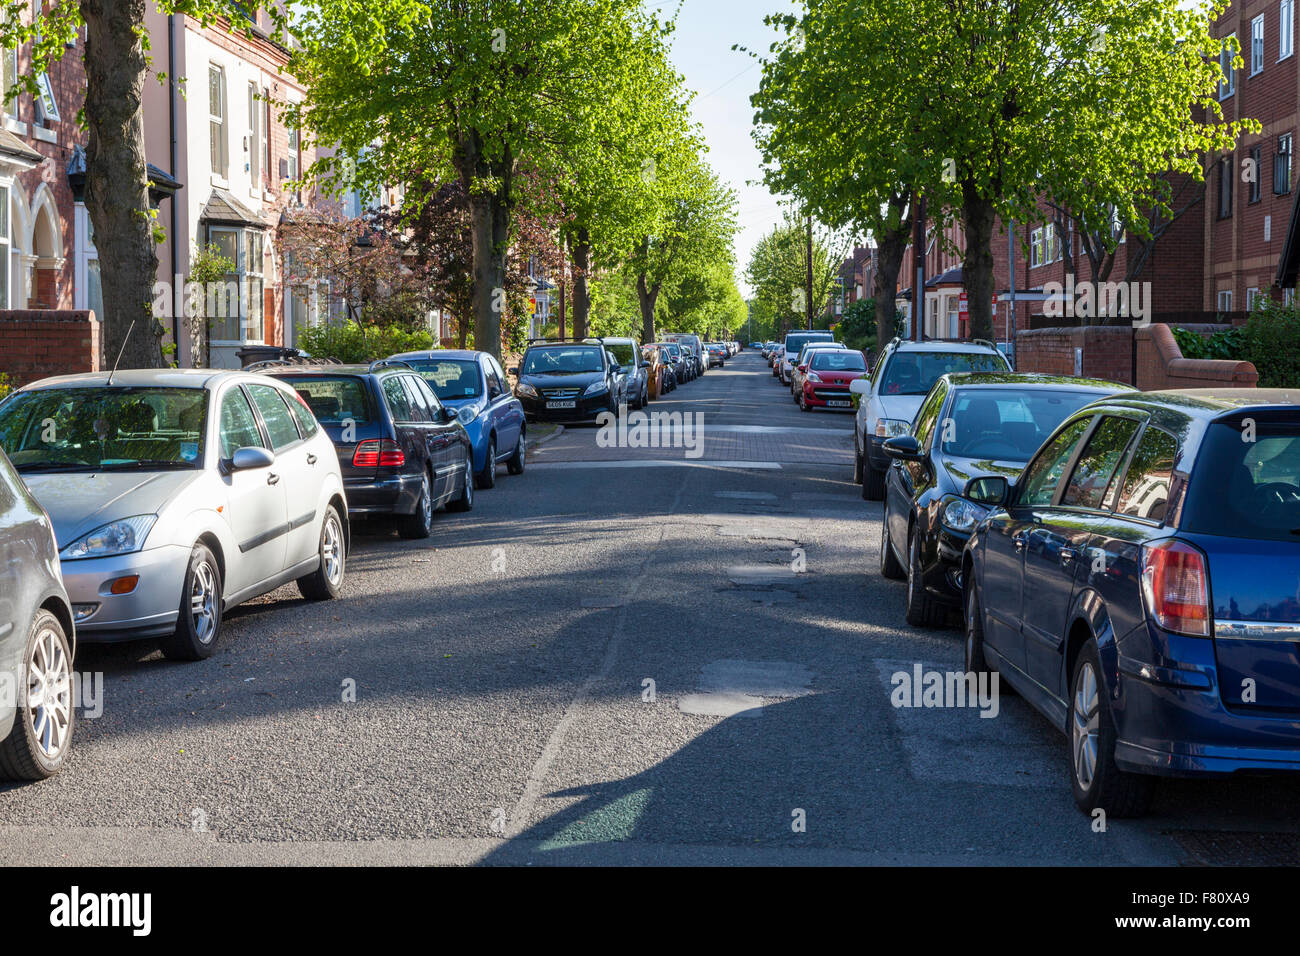 On street parking. A tree lined road with cars parked on both sides, West Bridgford, Nottinghamshire, England, UK Stock Photo